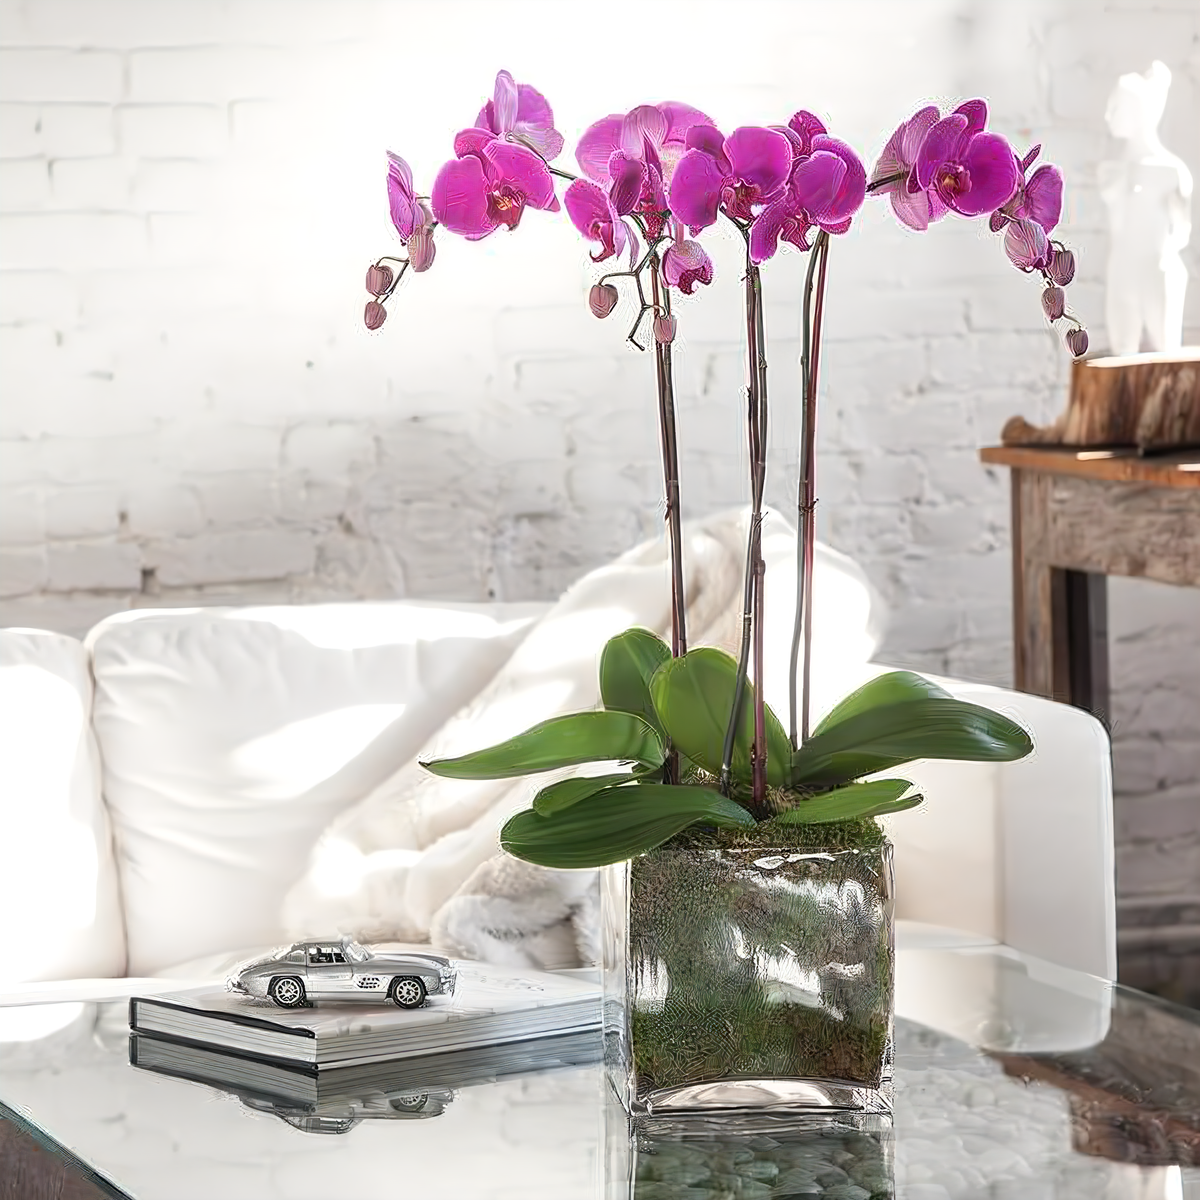 NYC Flower Delivery - Triple Purple Phalaenopsis Orchid - Plants